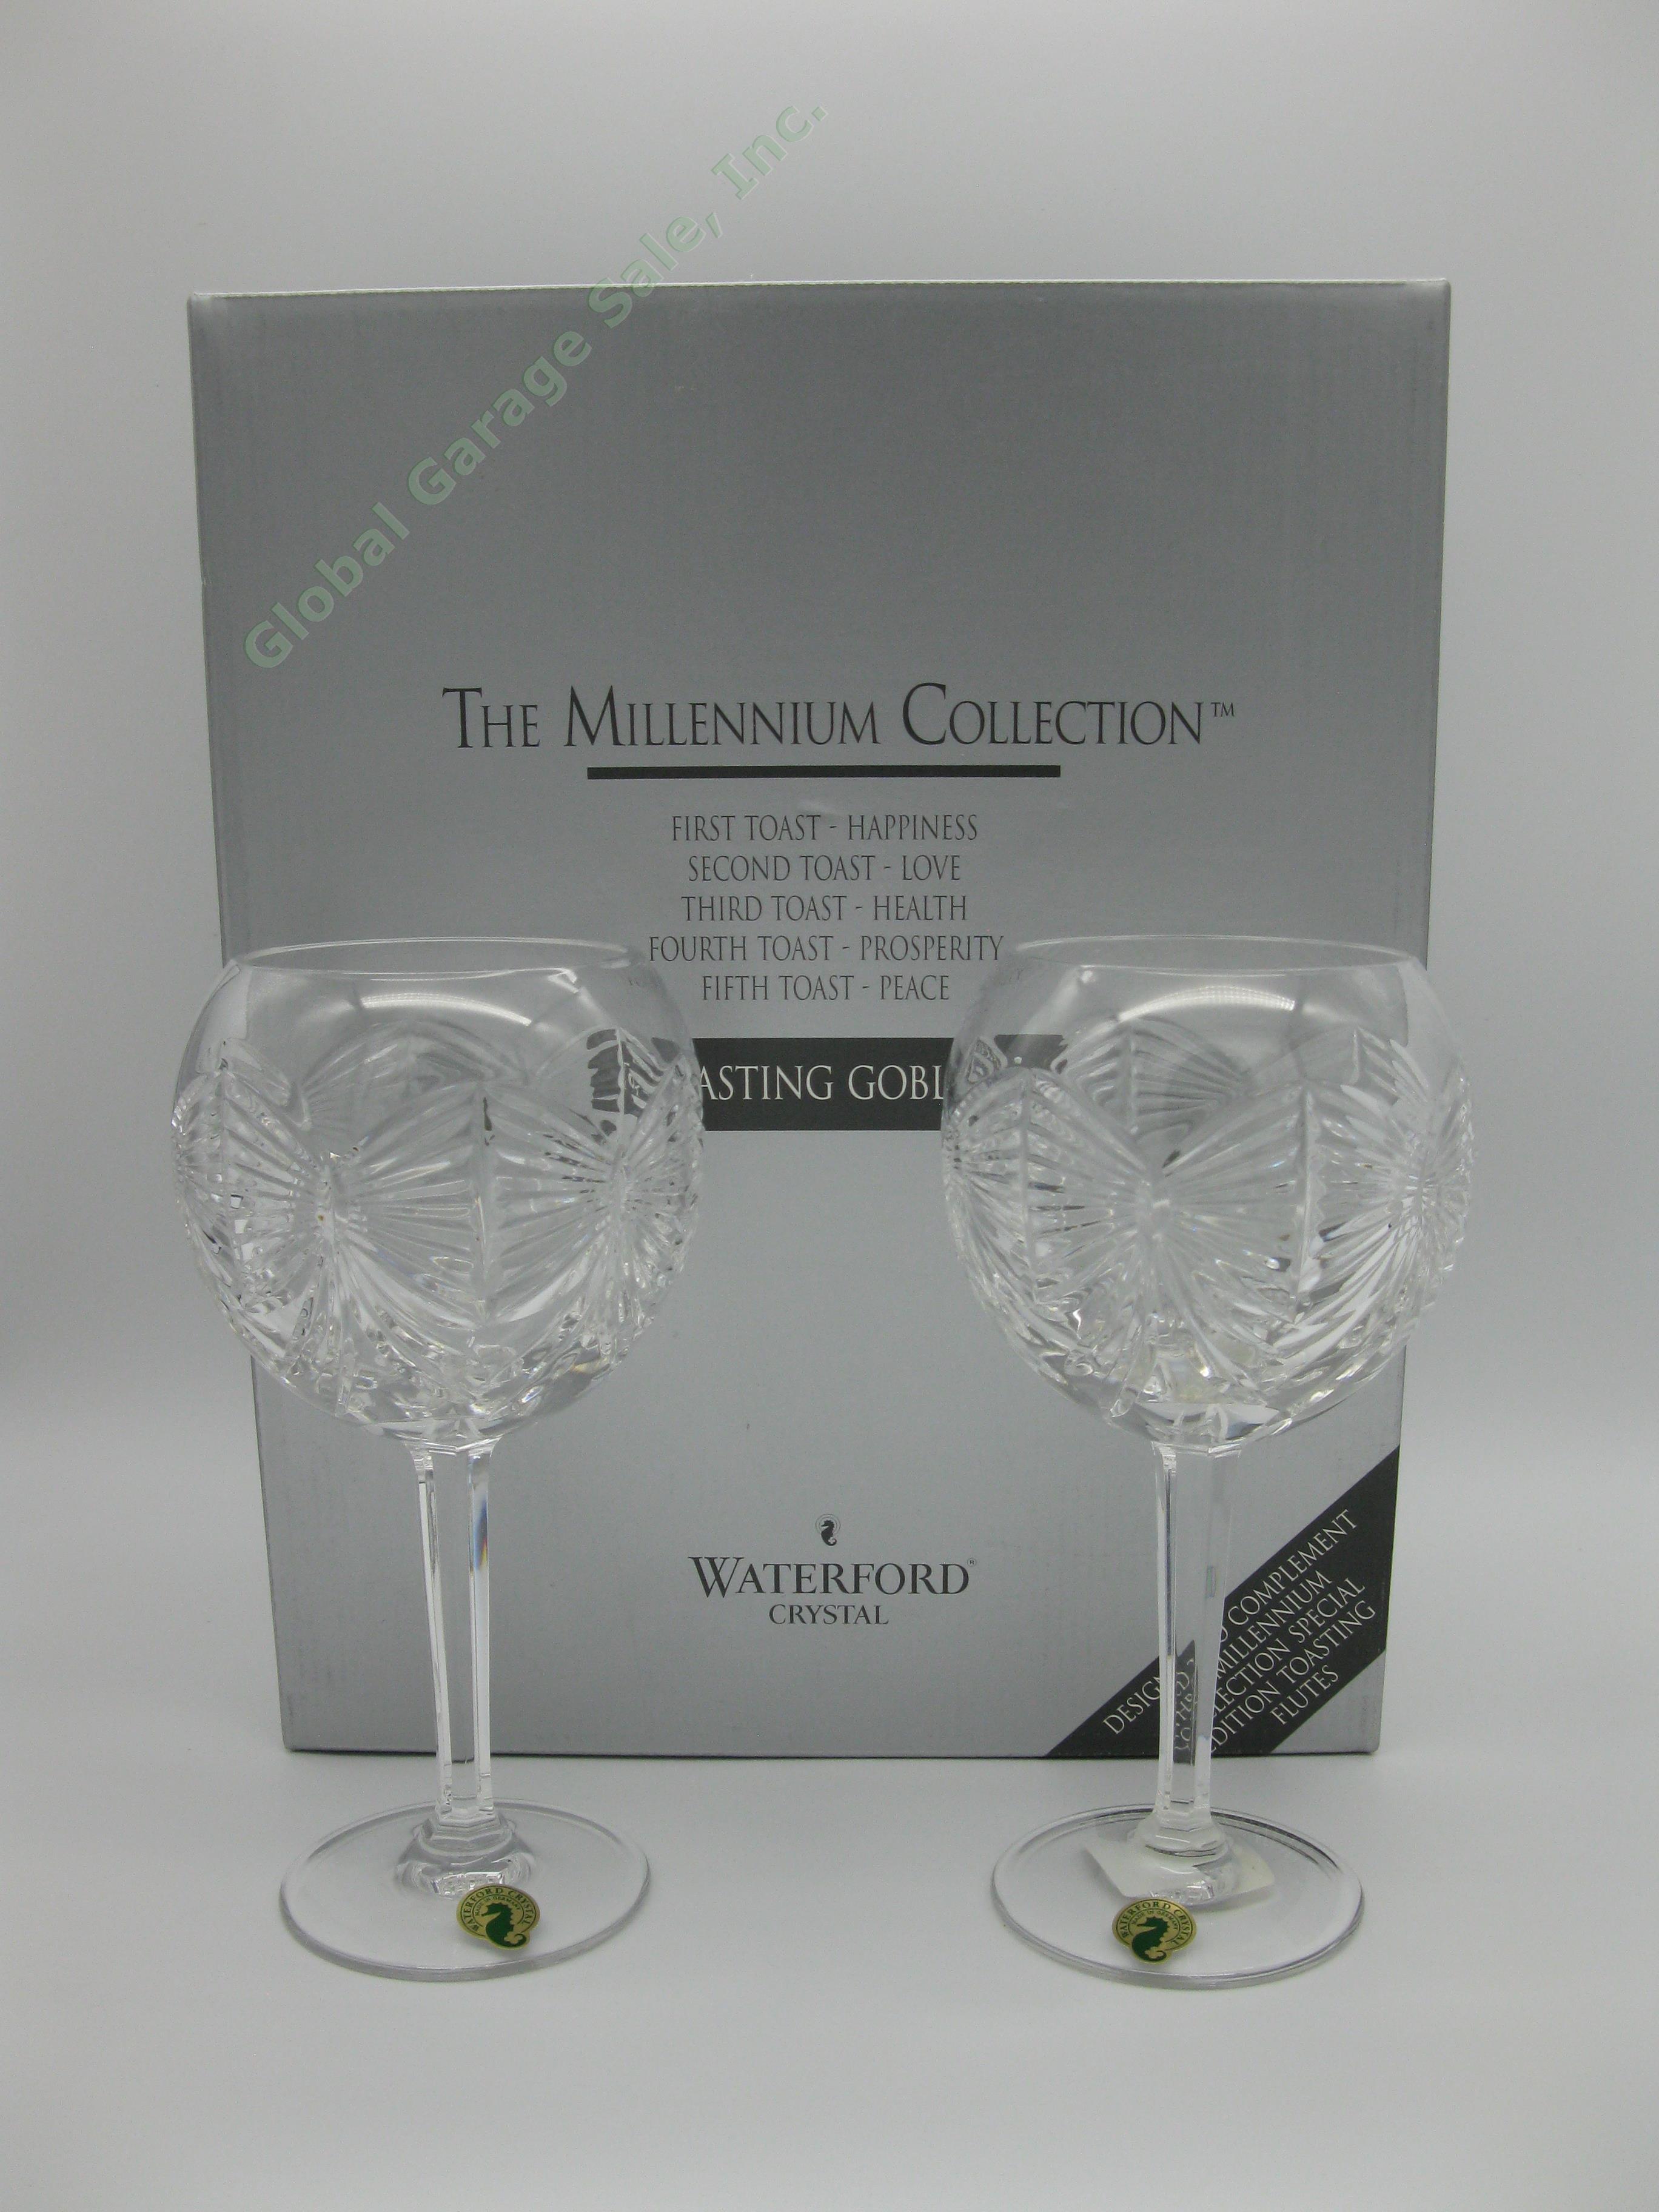 Waterford Crystal Millennium Collection HAPPINESS Toasting Goblet Glass Set MINT